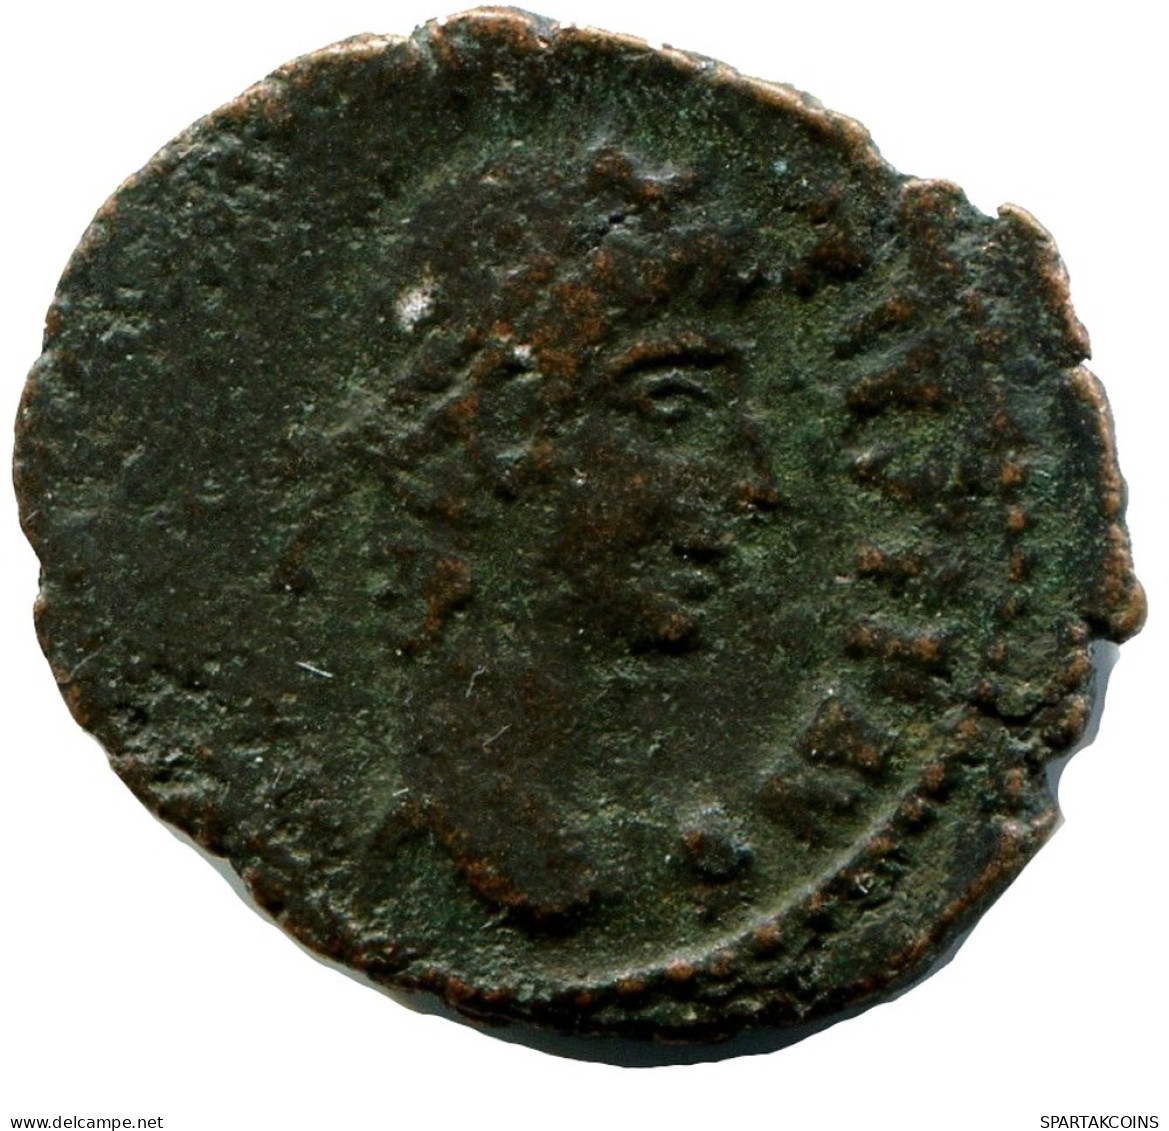 CONSTANTIUS II MINTED IN ANTIOCH FOUND IN IHNASYAH HOARD EGYPT #ANC11243.14.D.A - L'Empire Chrétien (307 à 363)